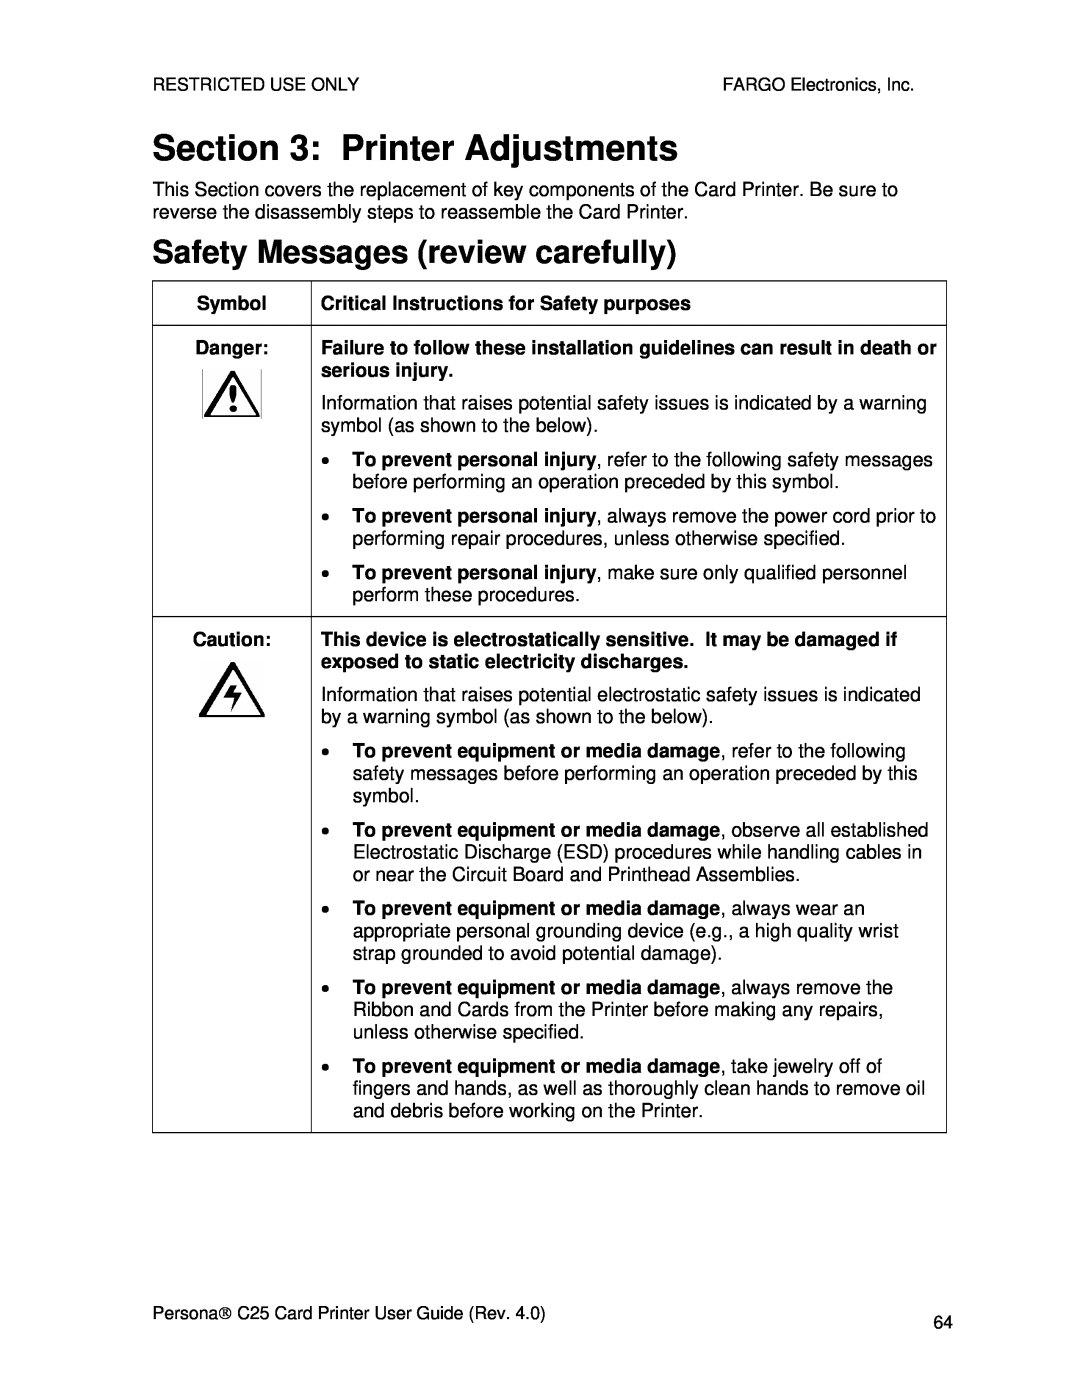 FARGO electronic S000256 manual Printer Adjustments, Safety Messages review carefully 